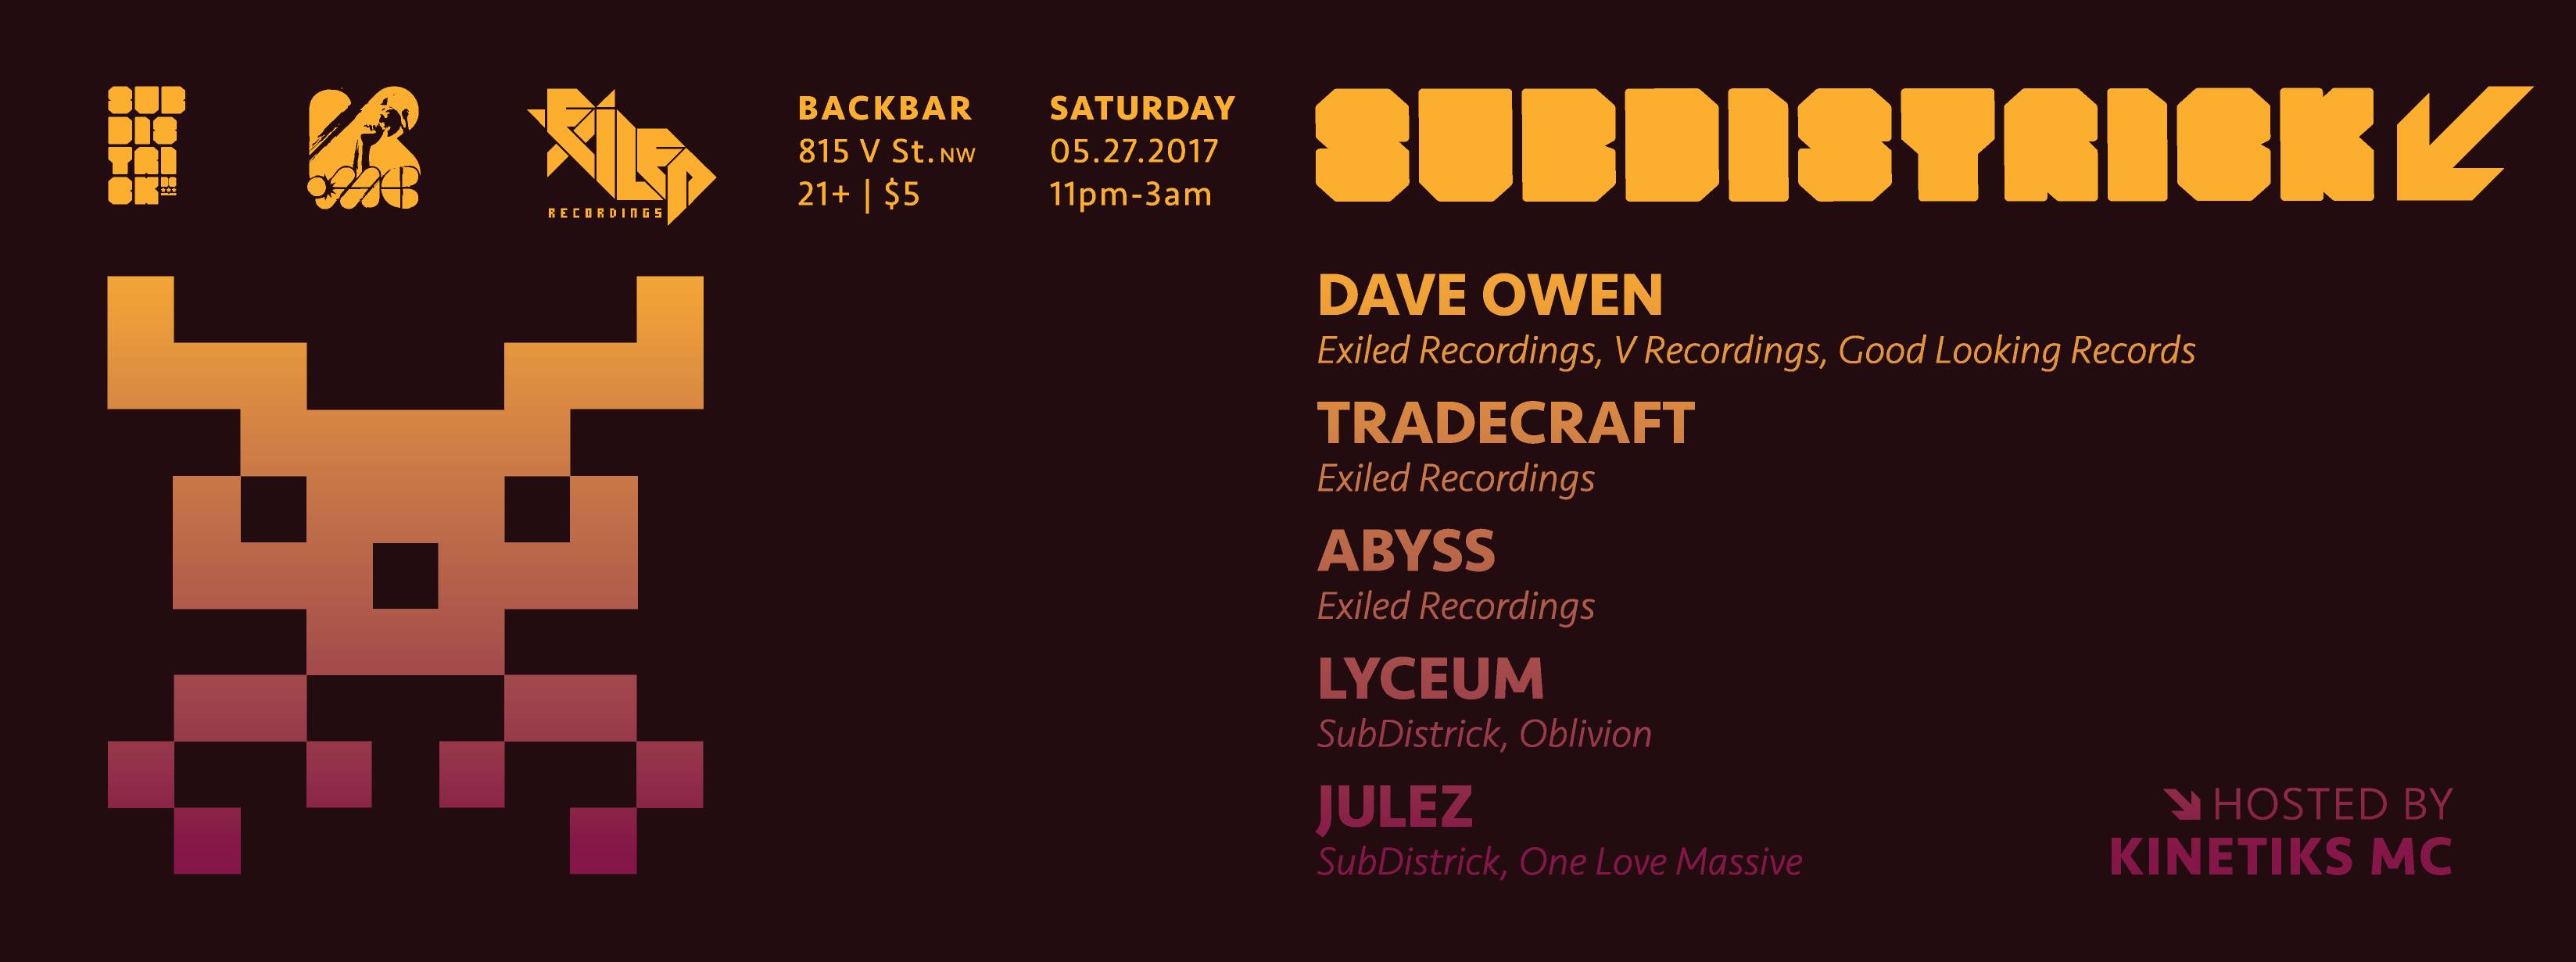 SubDistrick May 2017! Exiled Recordings takeover feat. DAVE OWEN, Tradecraft D&B, Abyss, Lyceum, Julez & Kinetiks MC! [05.27.17]